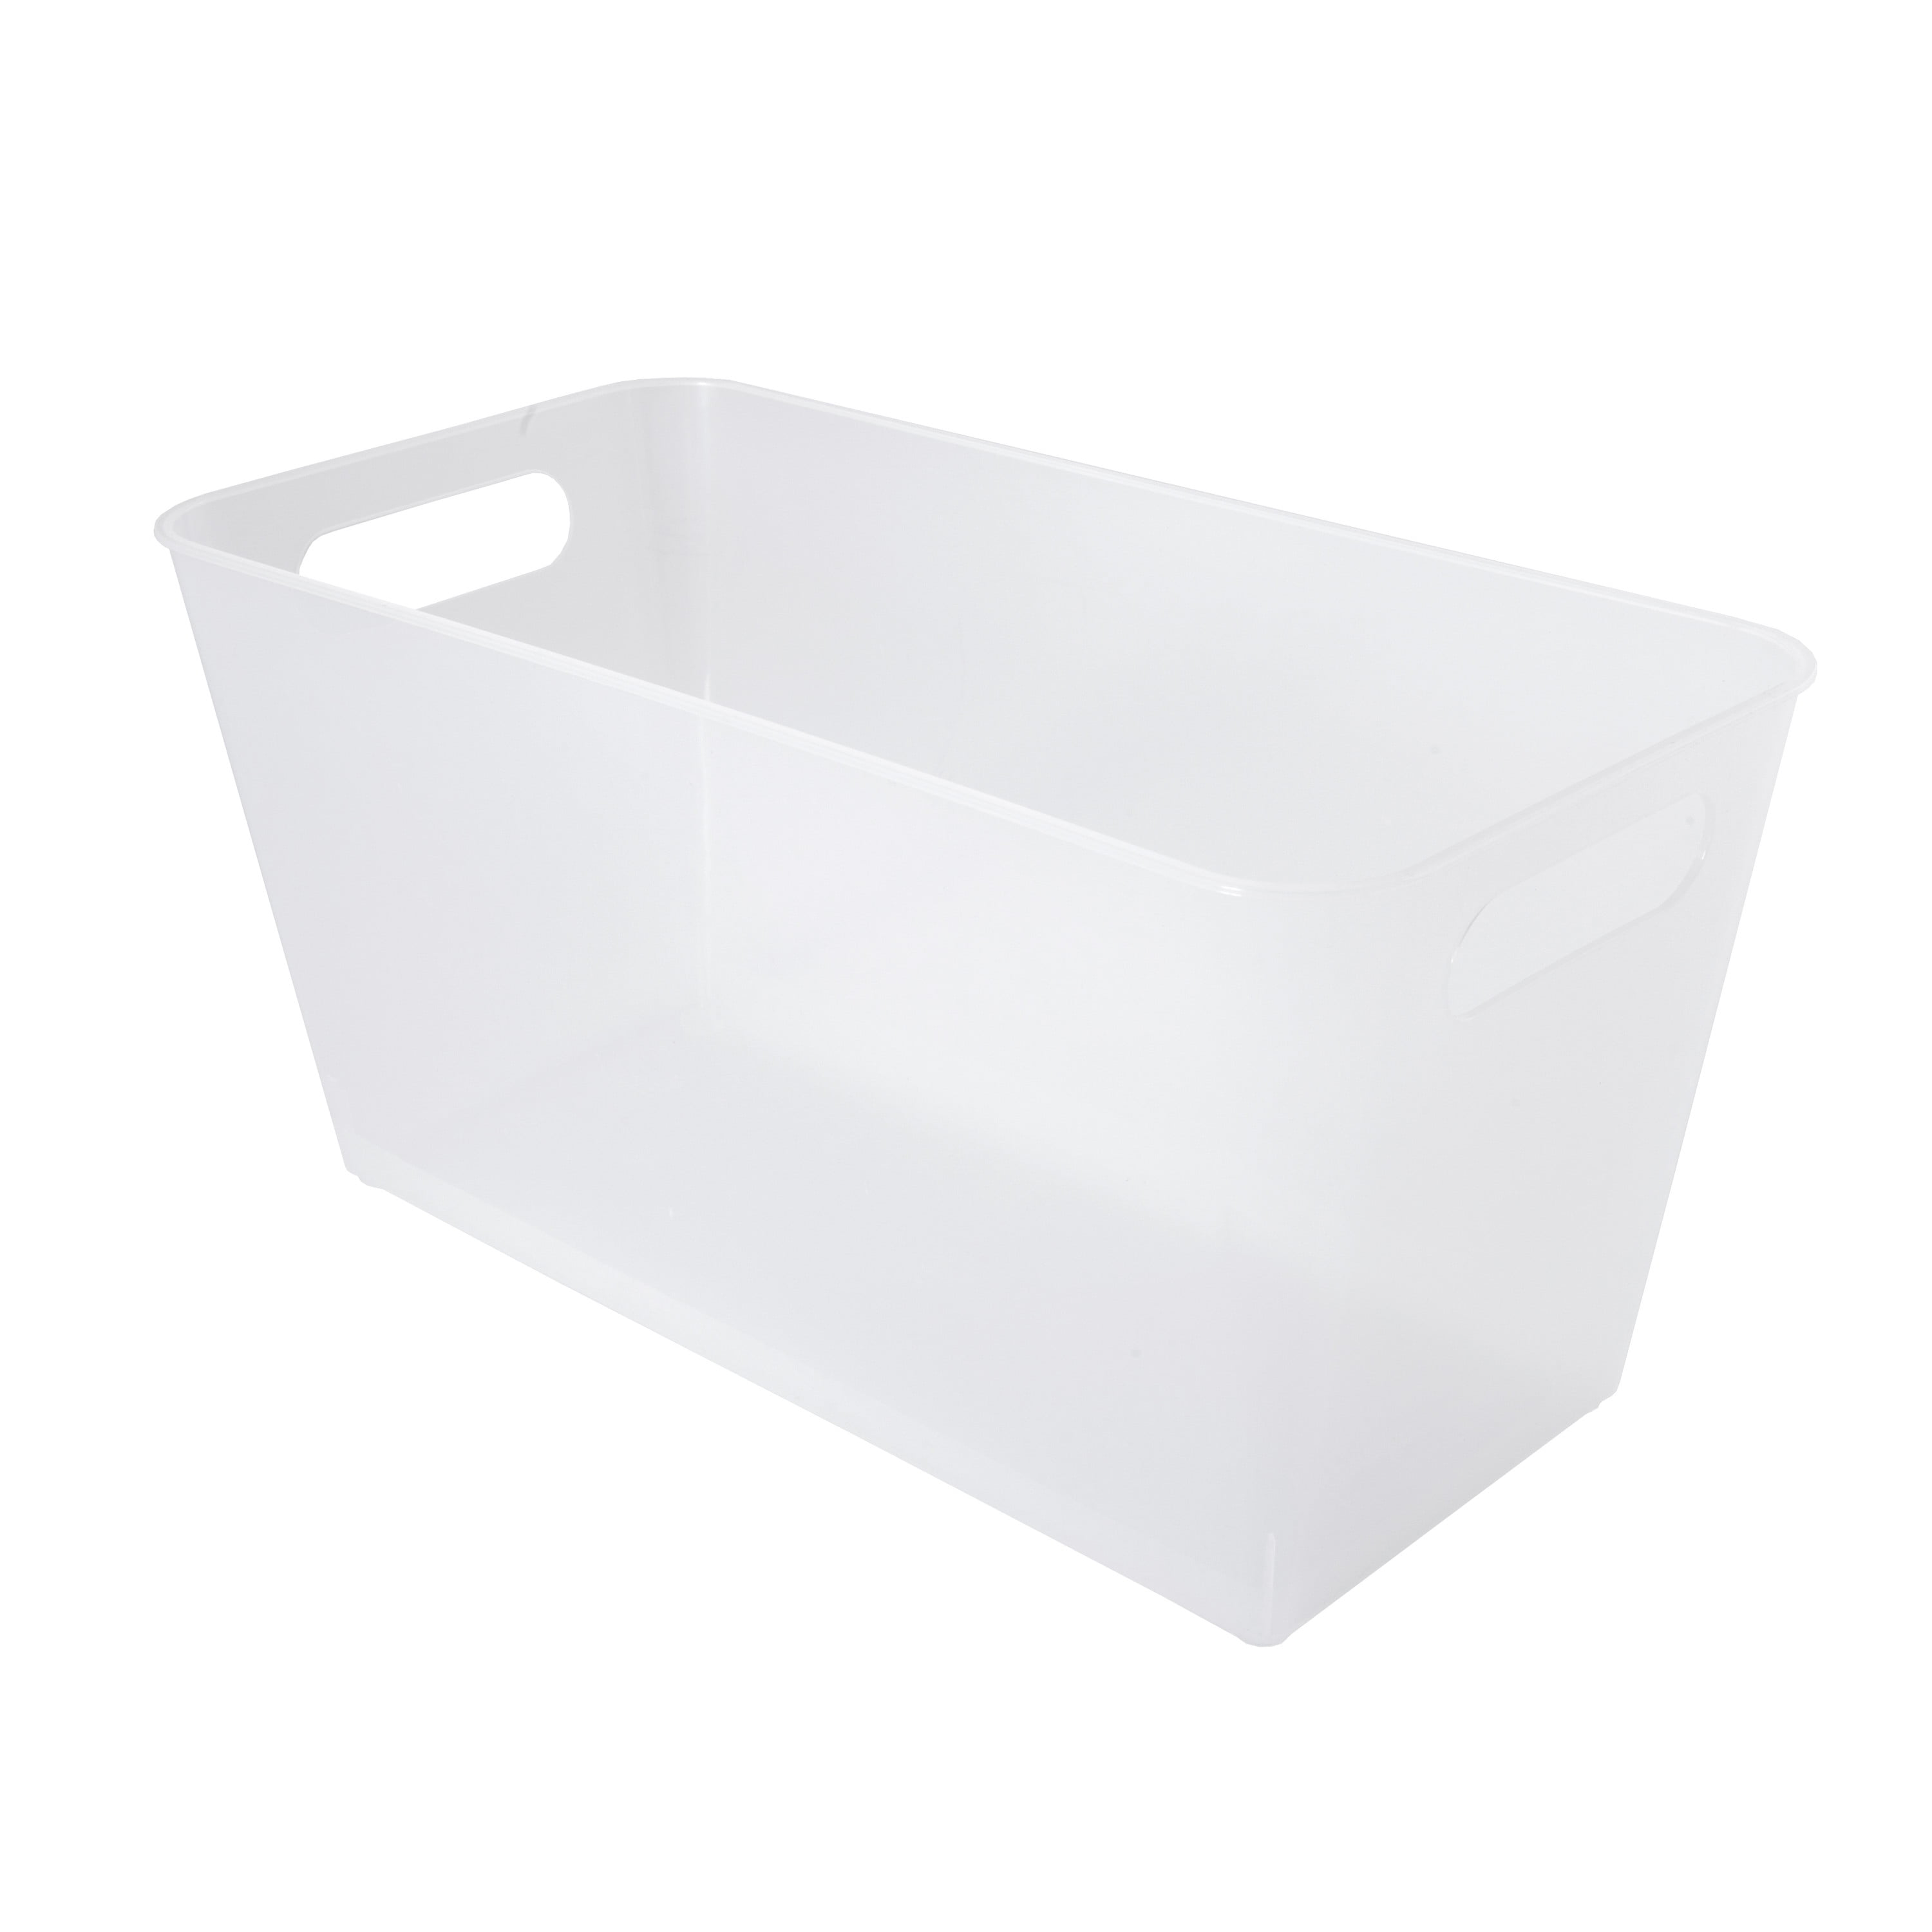 Kenney Storage Made Simple Drawer Organizer Bin 4 Compartments in Clear  KN68064P2REM - The Home Depot